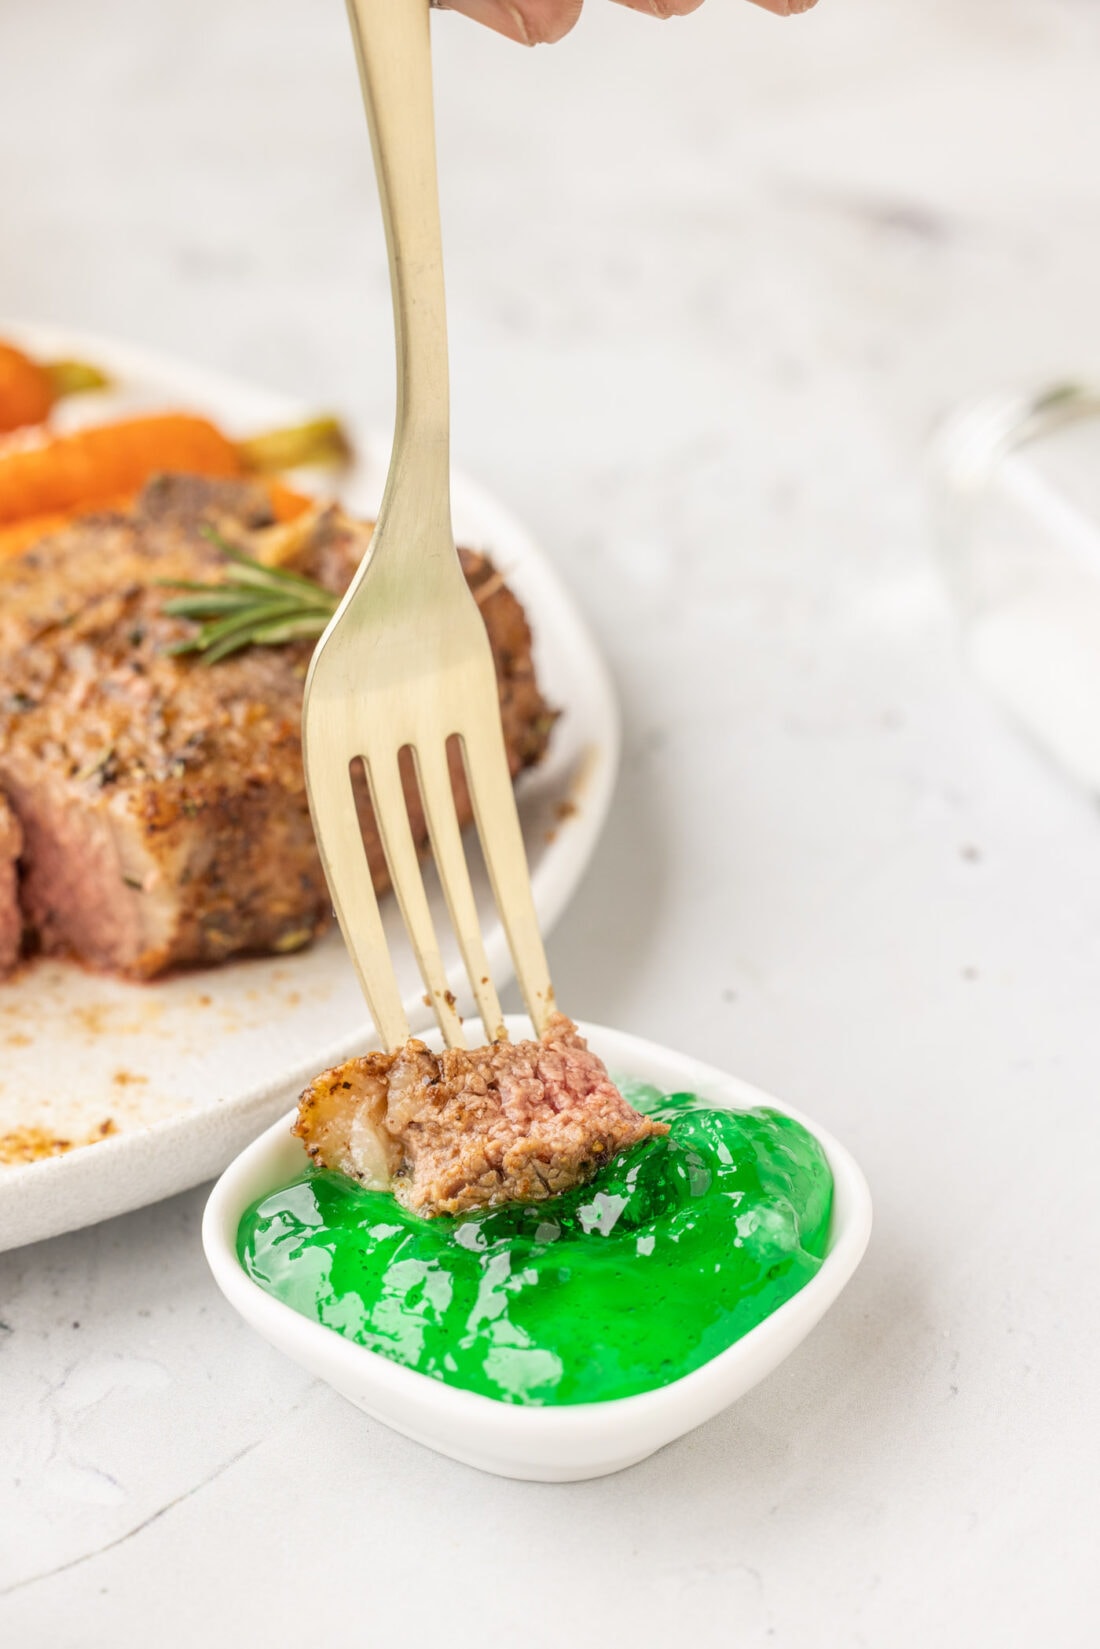 dipping Air Fryer Lamb Chop in mint jelly